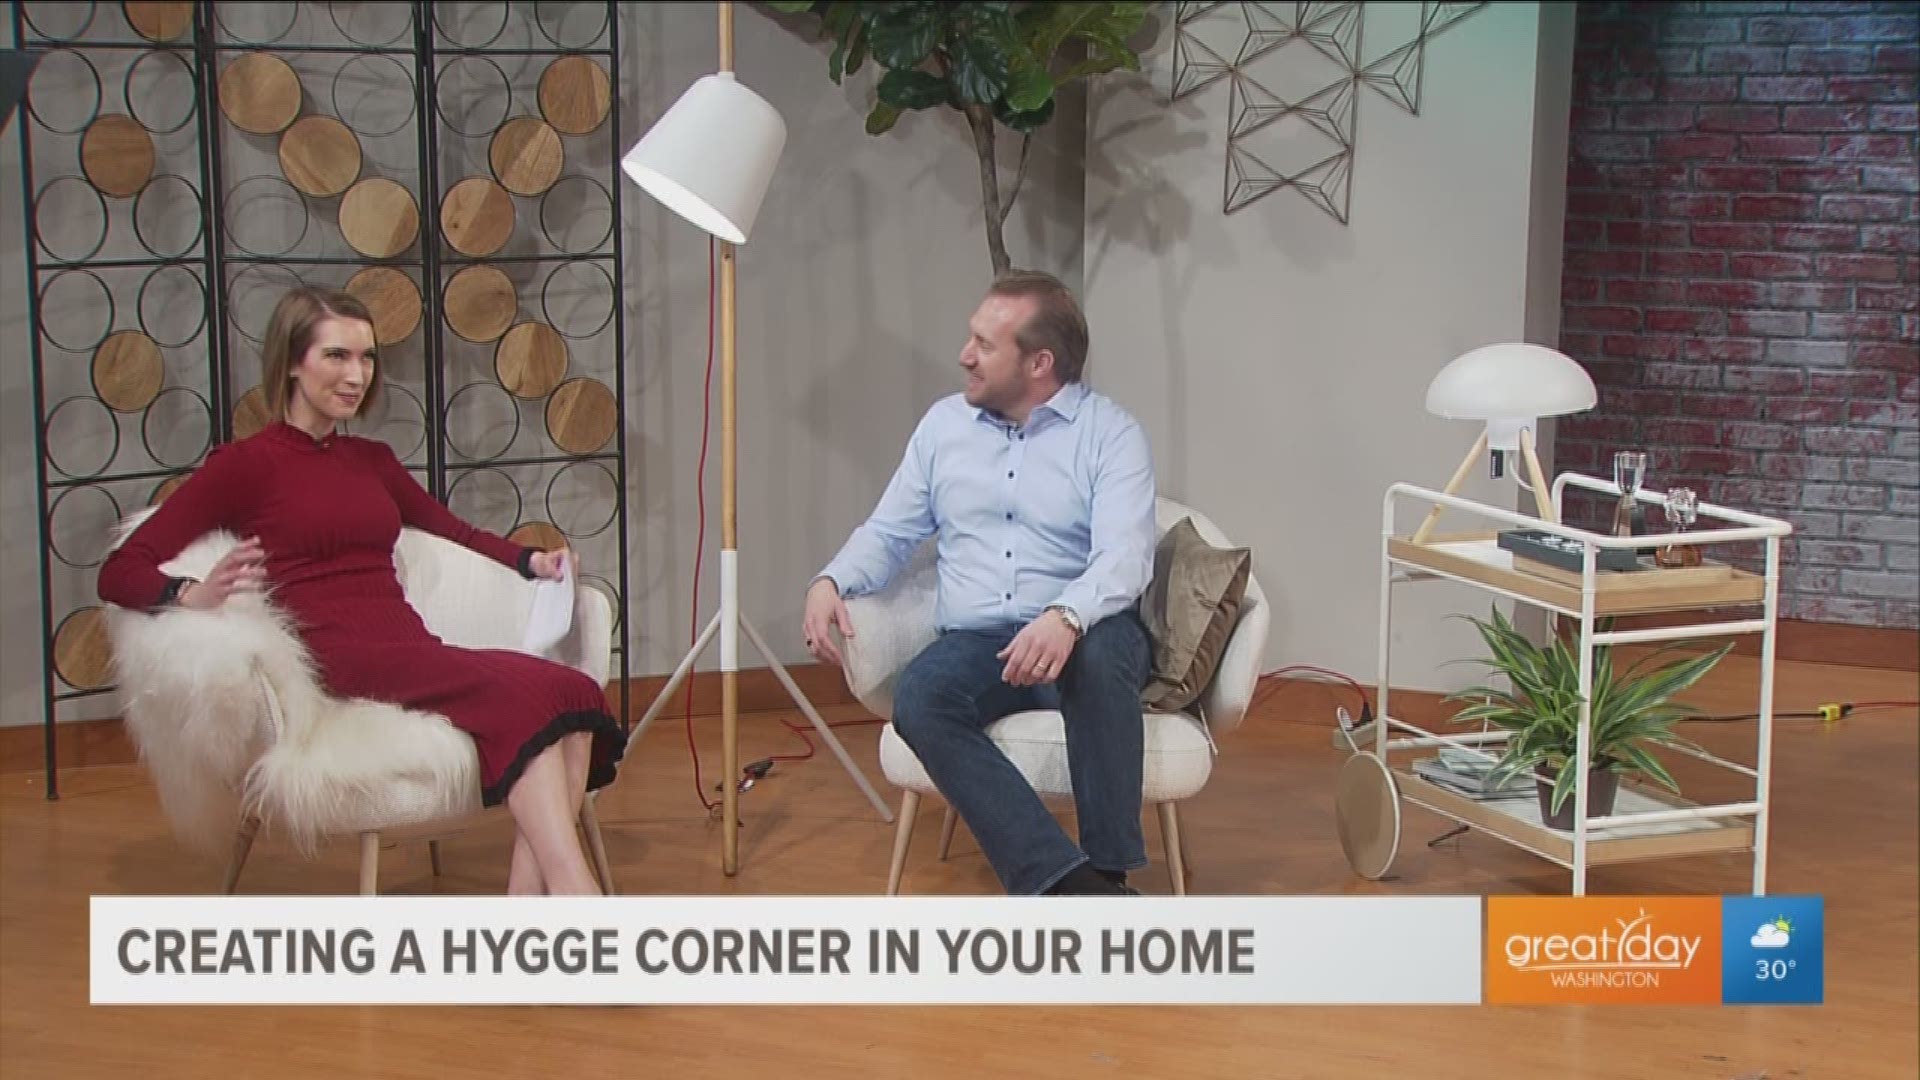 Tim Machenaud from BoConcept shares how to create a hygge, or cozy, corner in your home this winter.